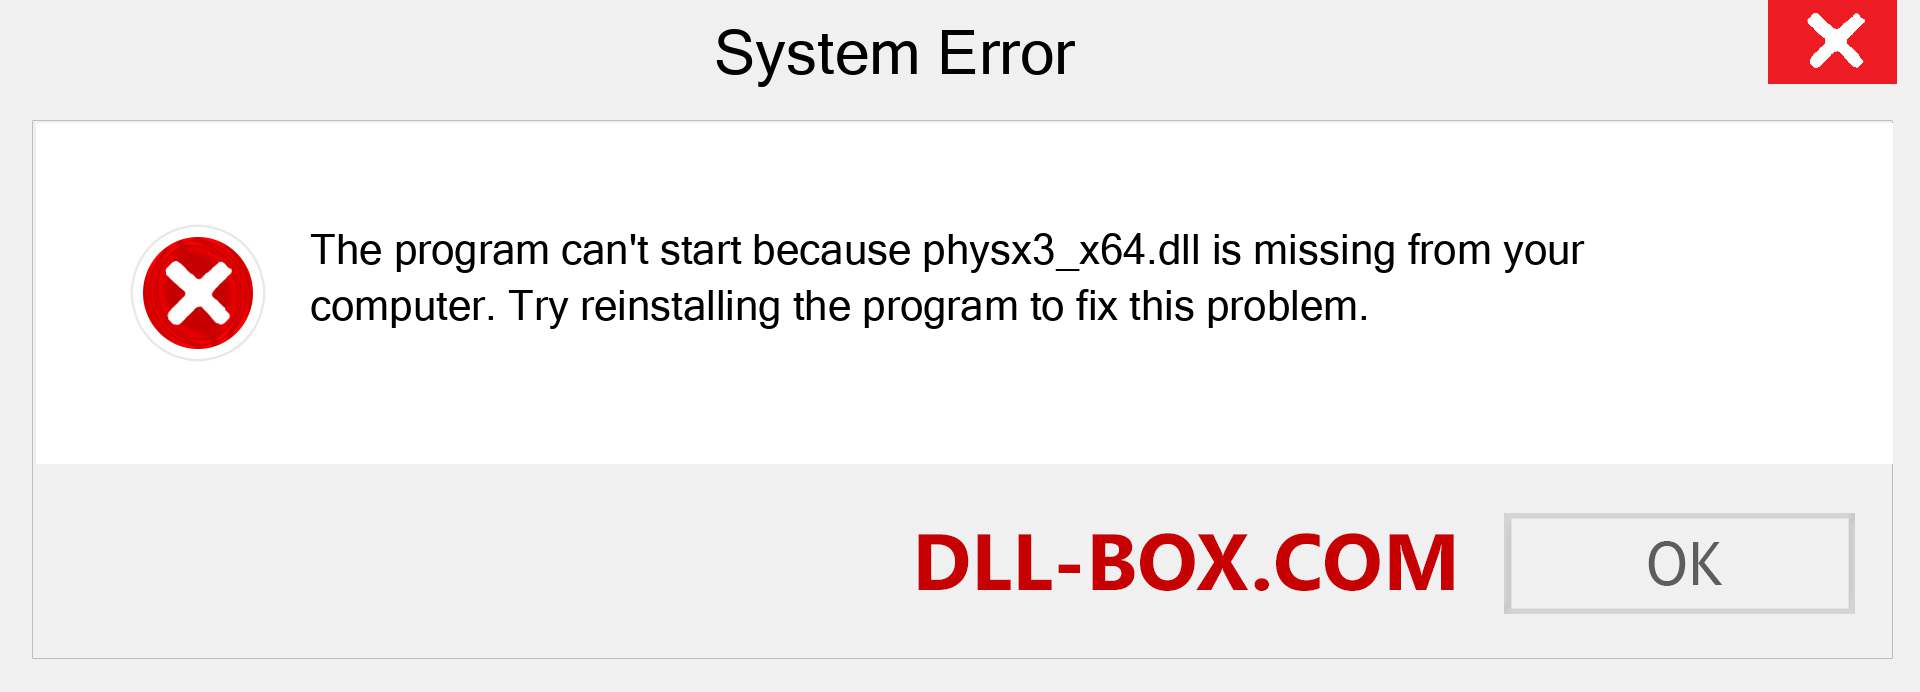  physx3_x64.dll file is missing?. Download for Windows 7, 8, 10 - Fix  physx3_x64 dll Missing Error on Windows, photos, images